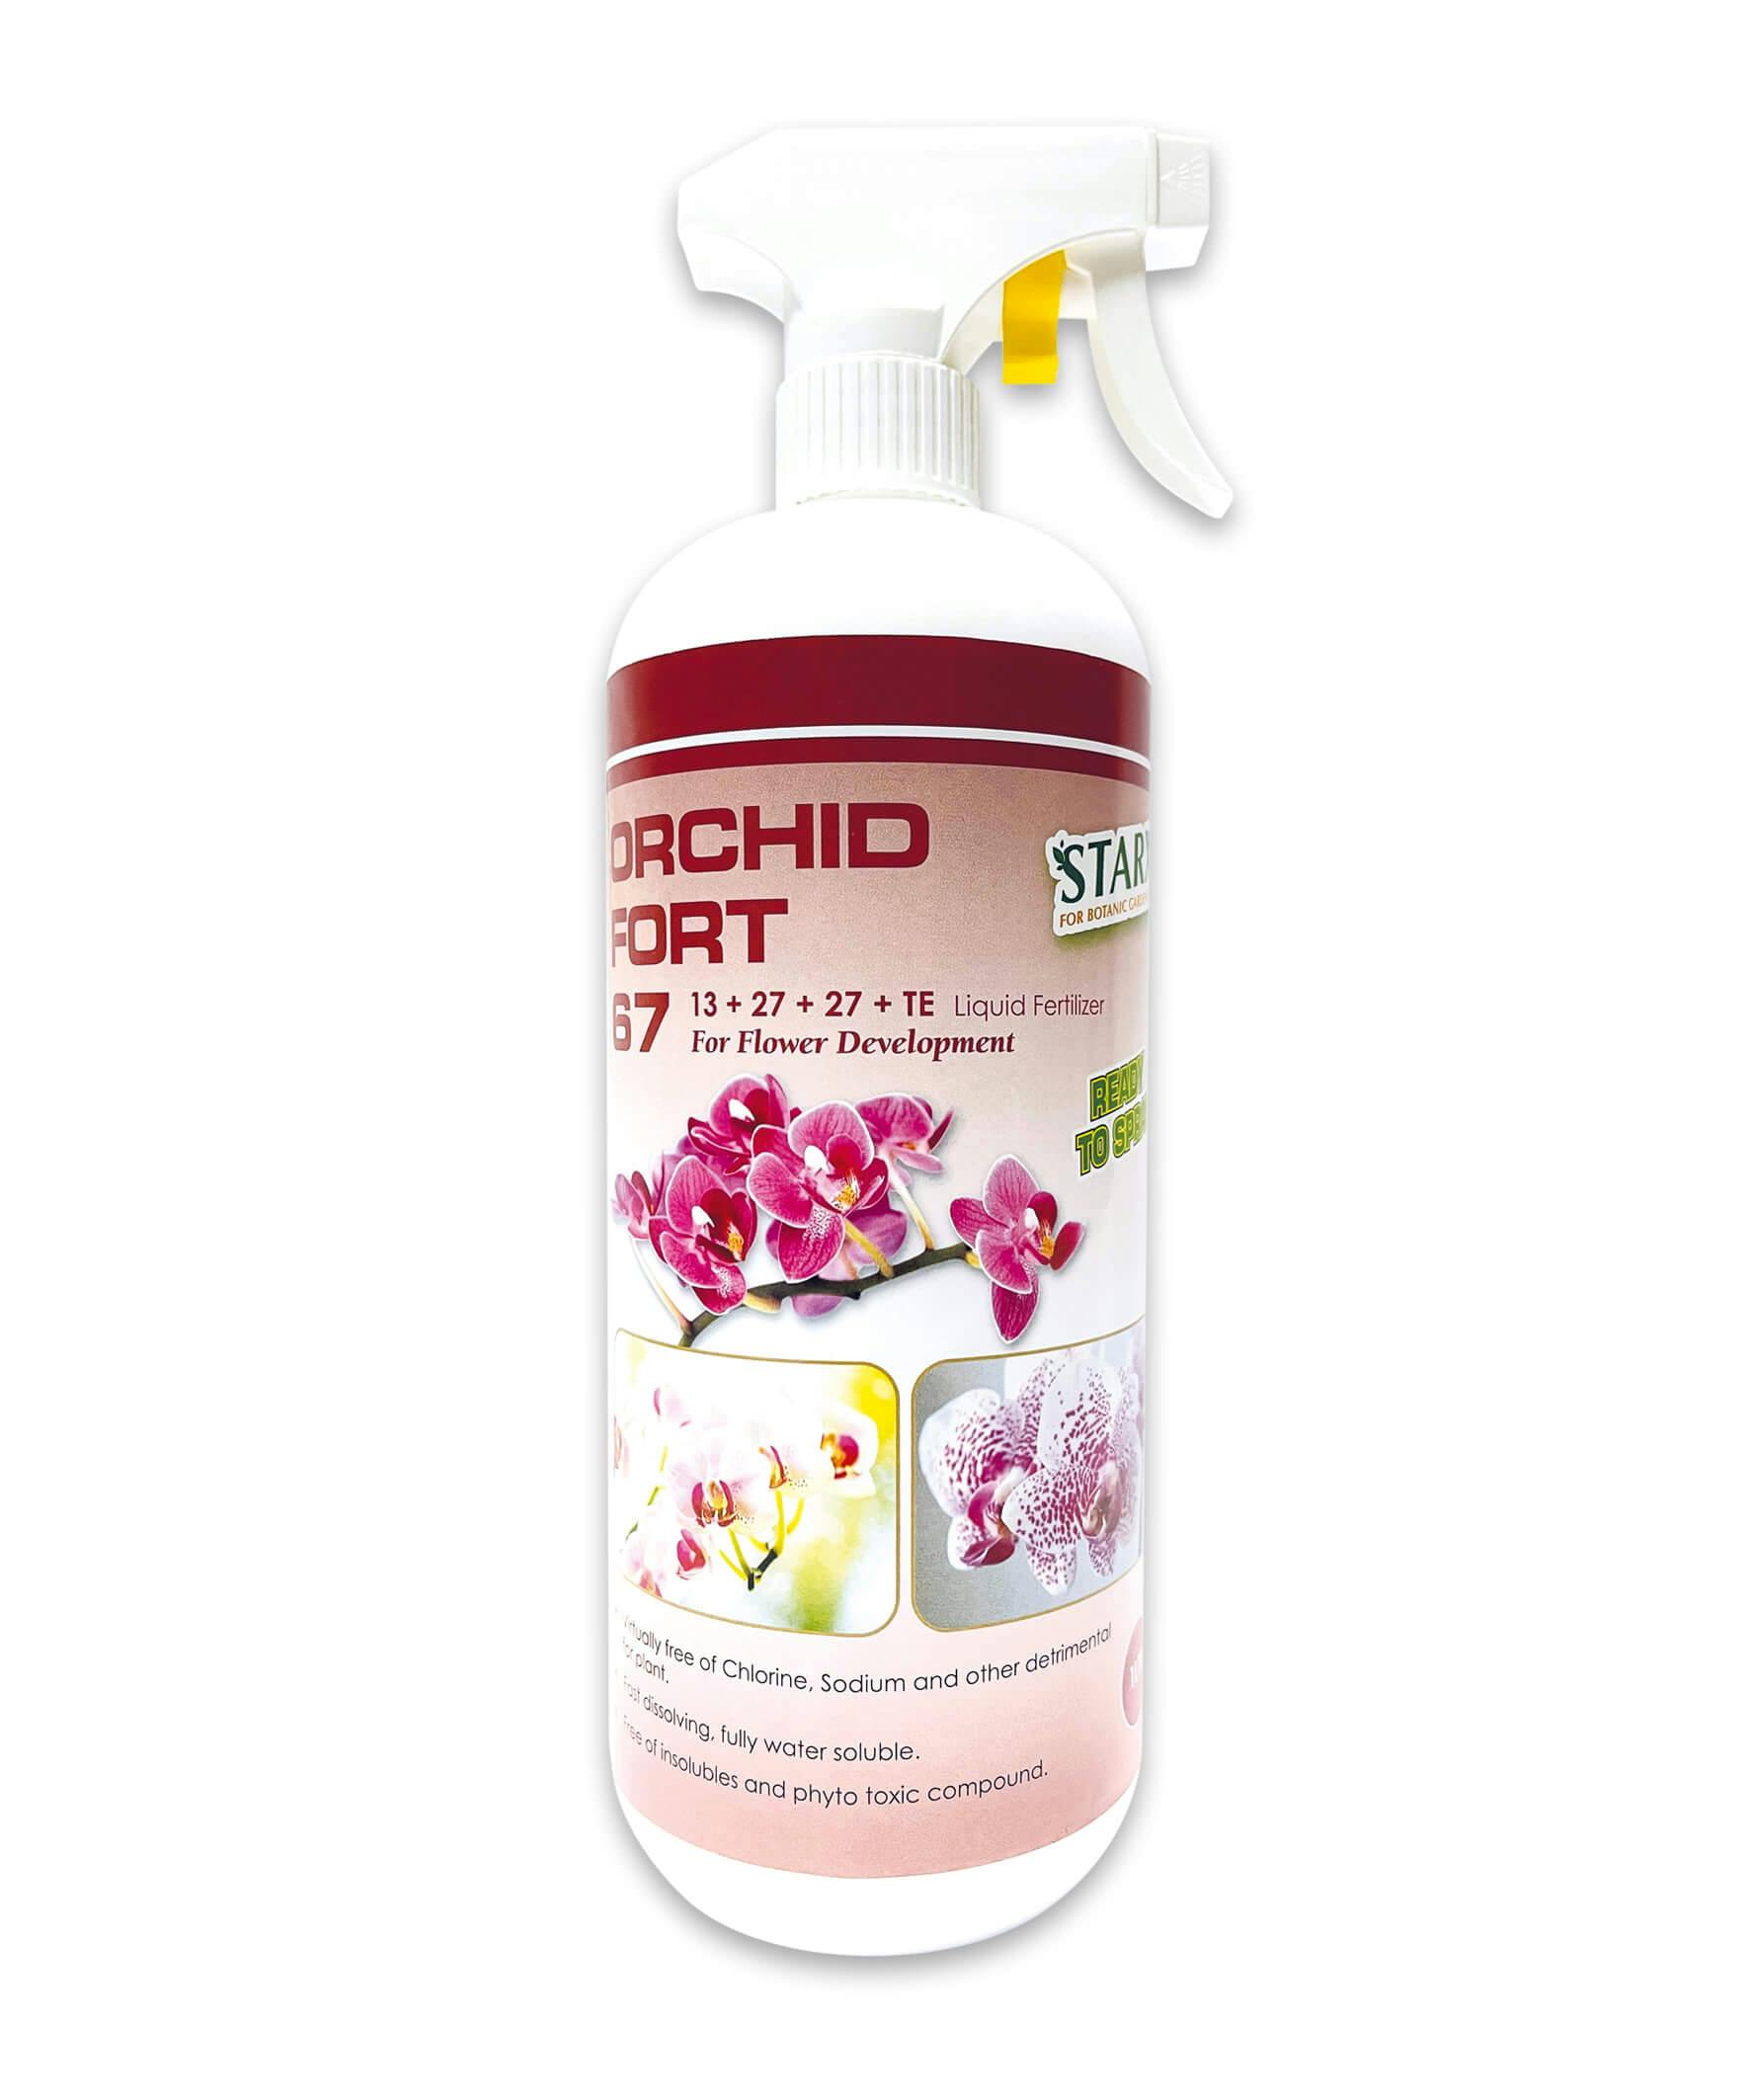 ORCHID FORT 67 (13+27+27) RTS (1L)